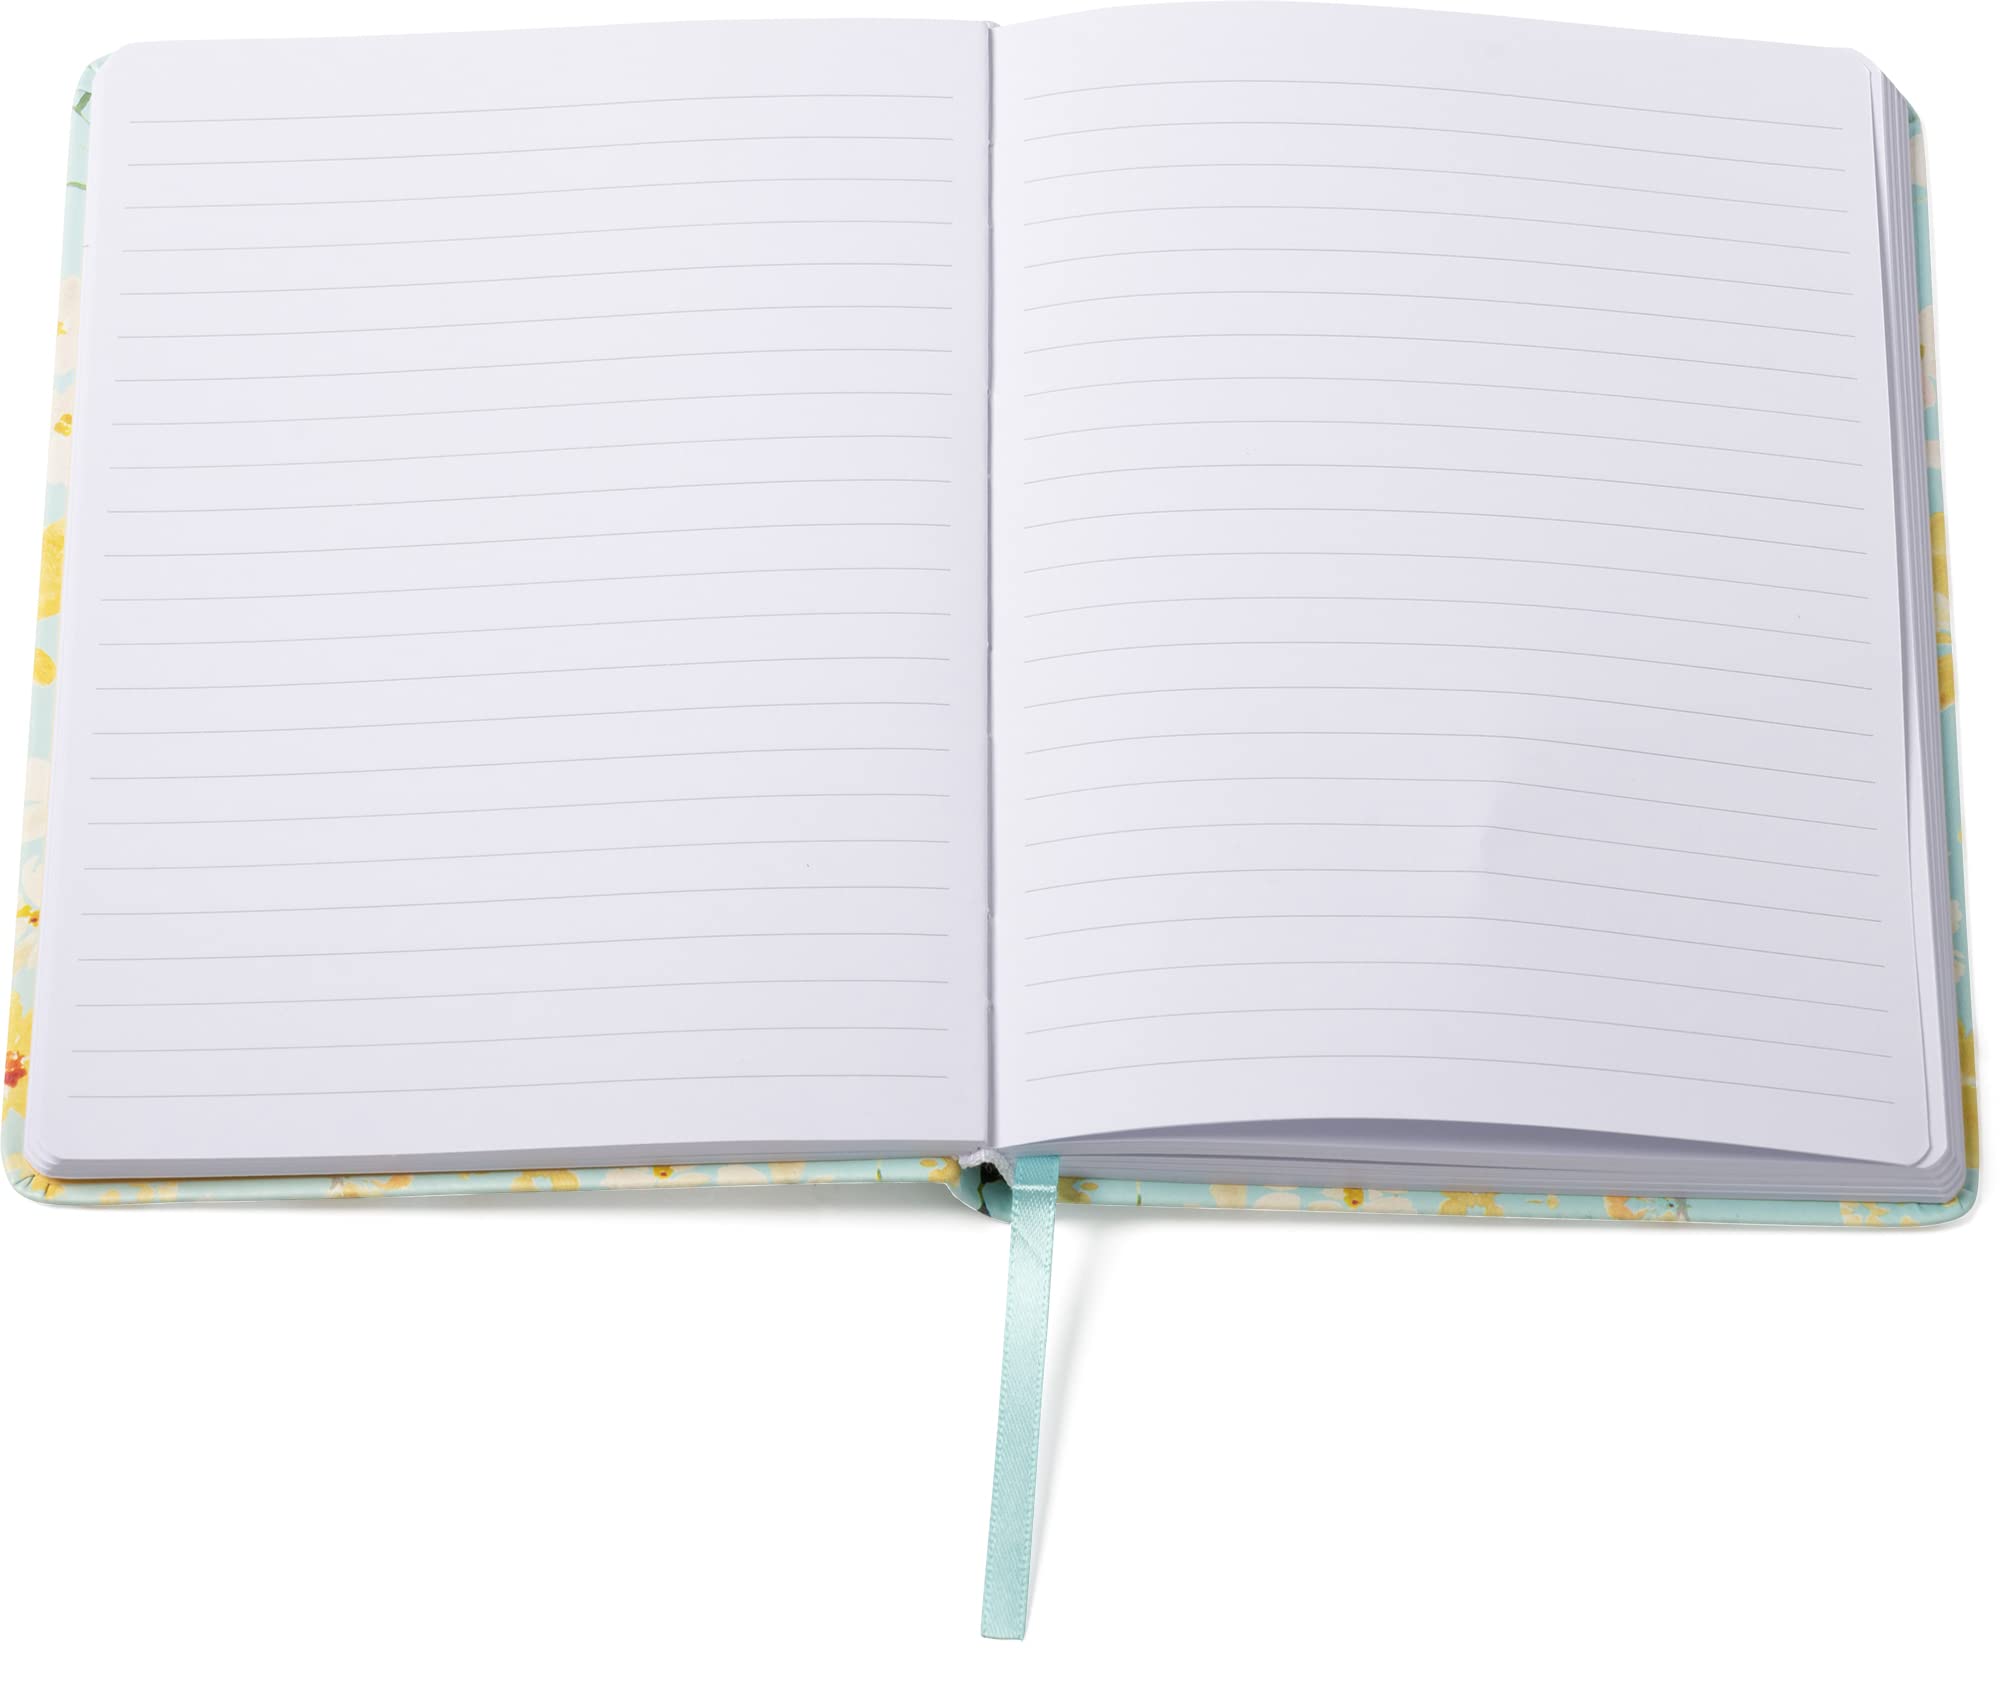 256 Page Eccolo Lined Journal Notebook